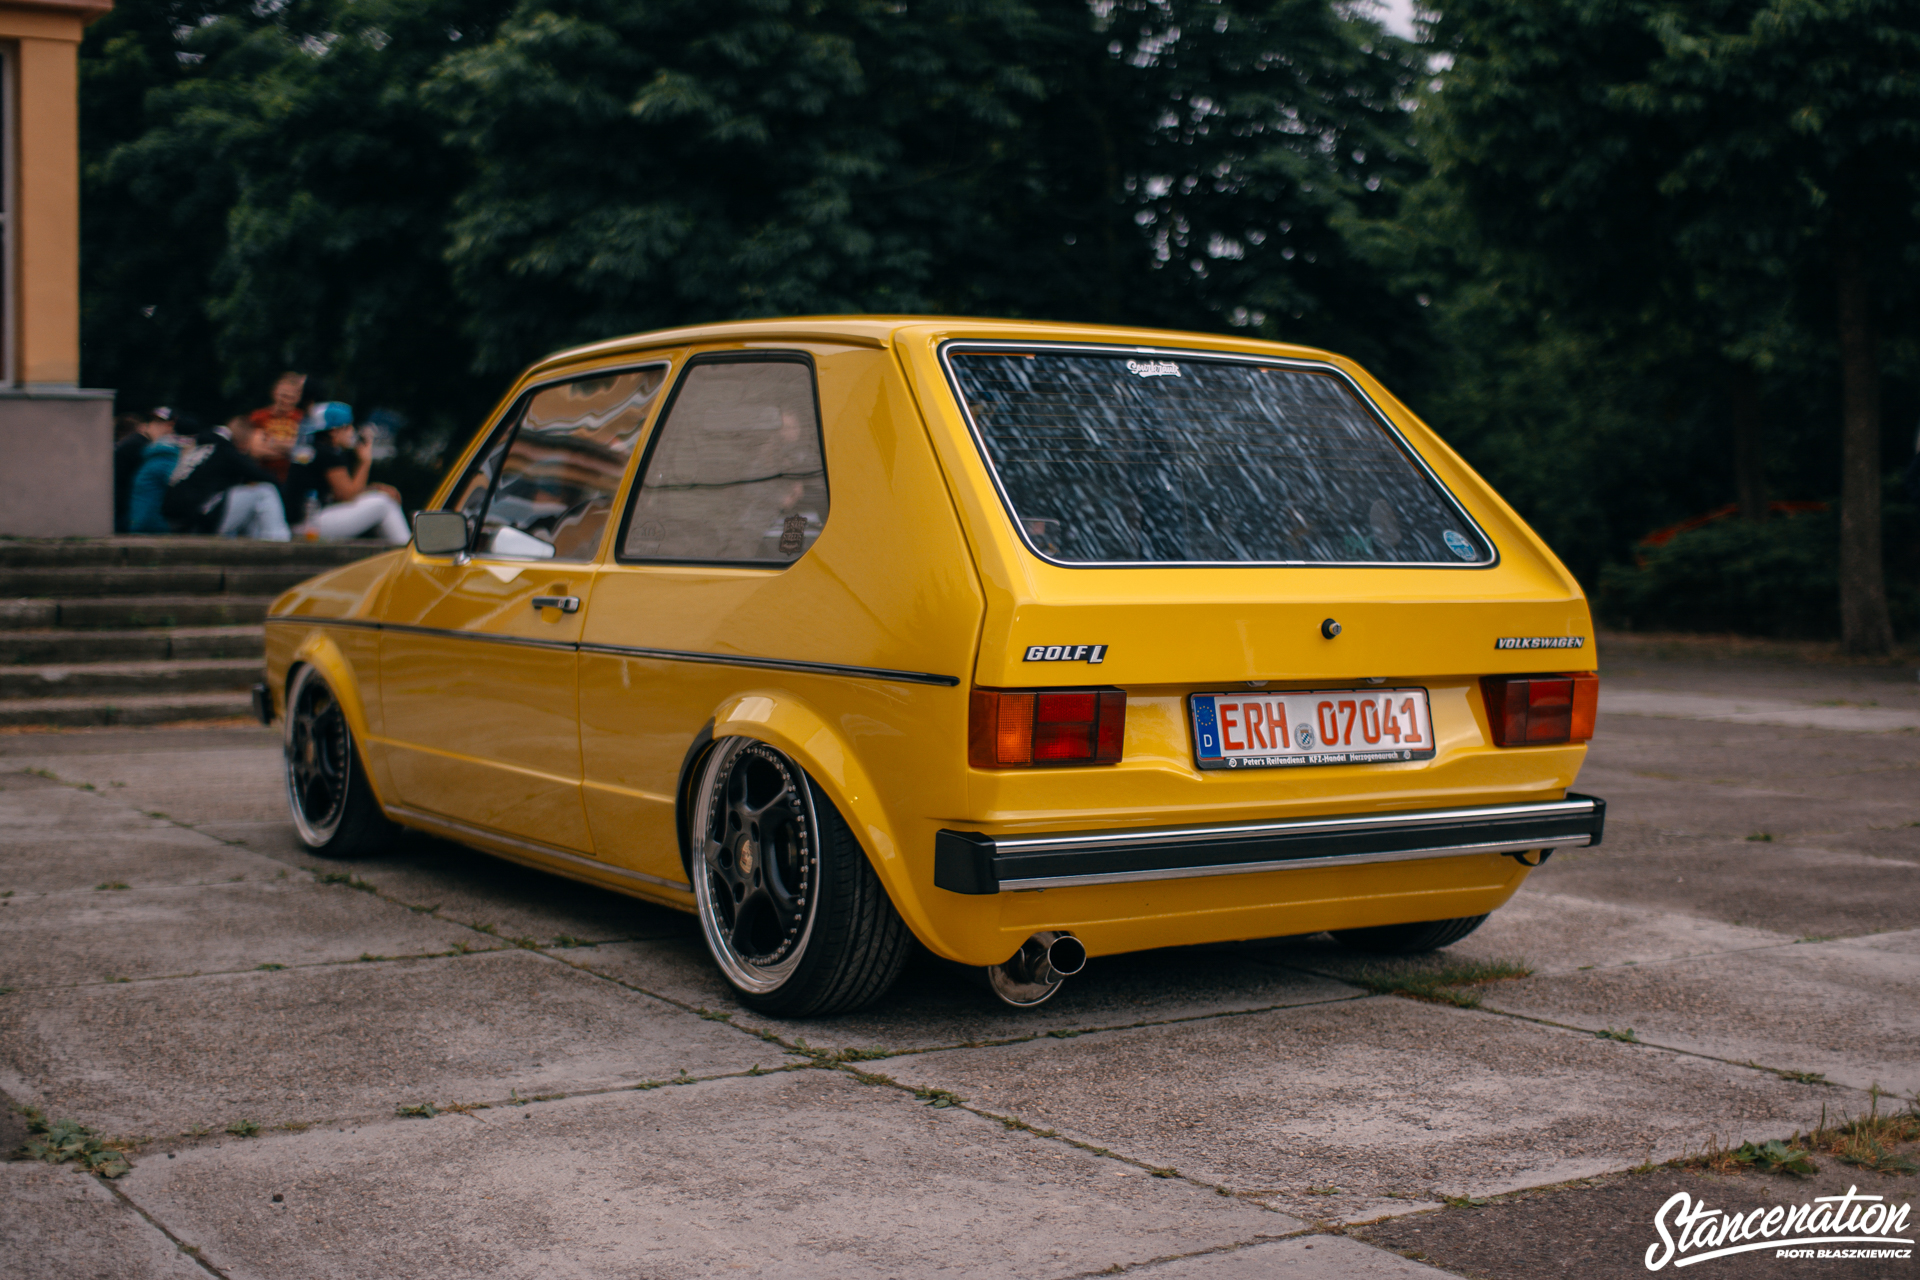 StanceNation Car Vehicle Stance Camber Volkswagen Volkswagen Golf Volkswagen Golf Mk1 1920x1280